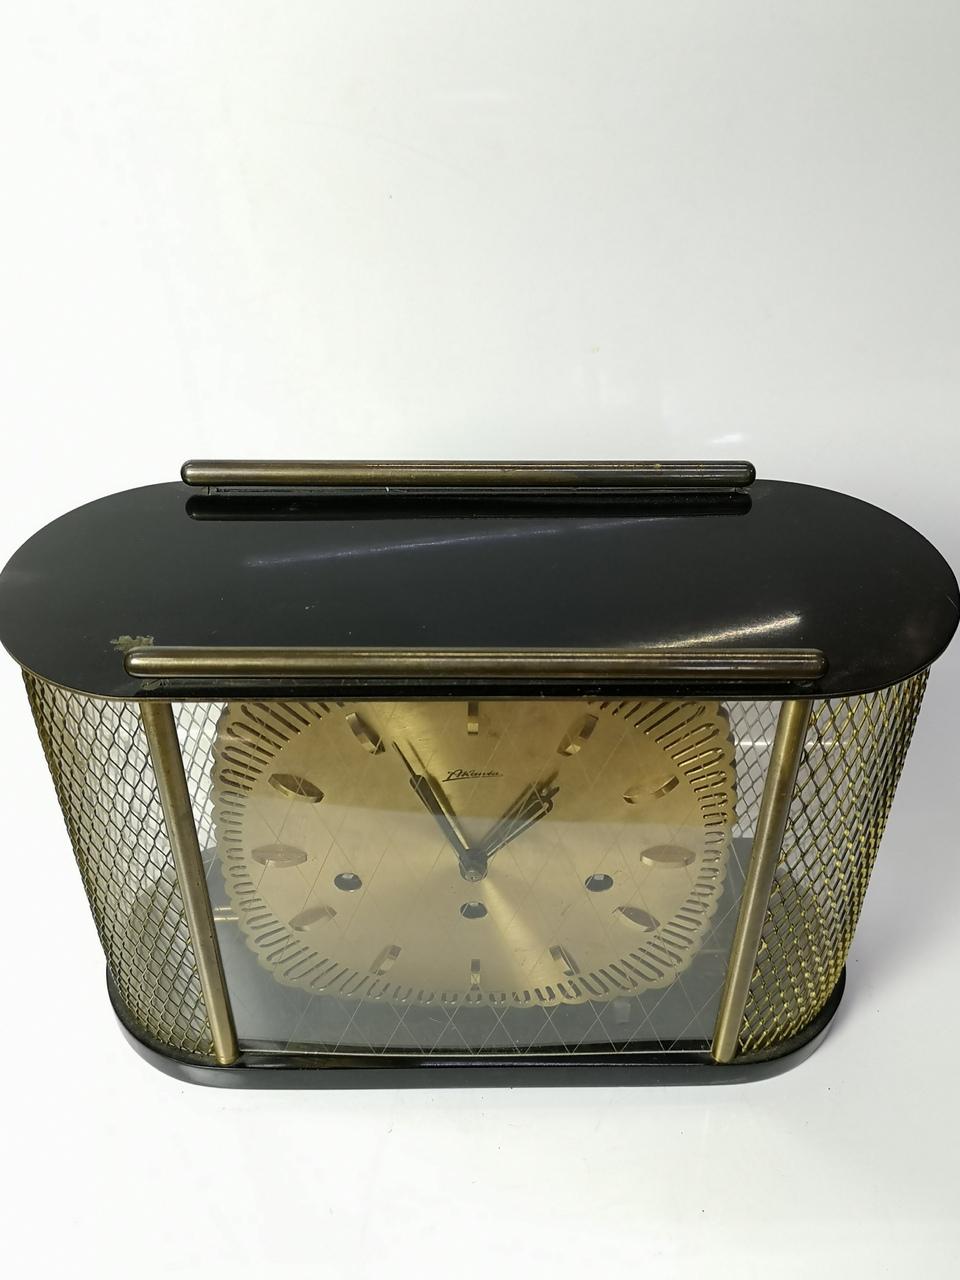 Mid-Century Modern Table Clock, by Atlanta, 1950s For Sale 9